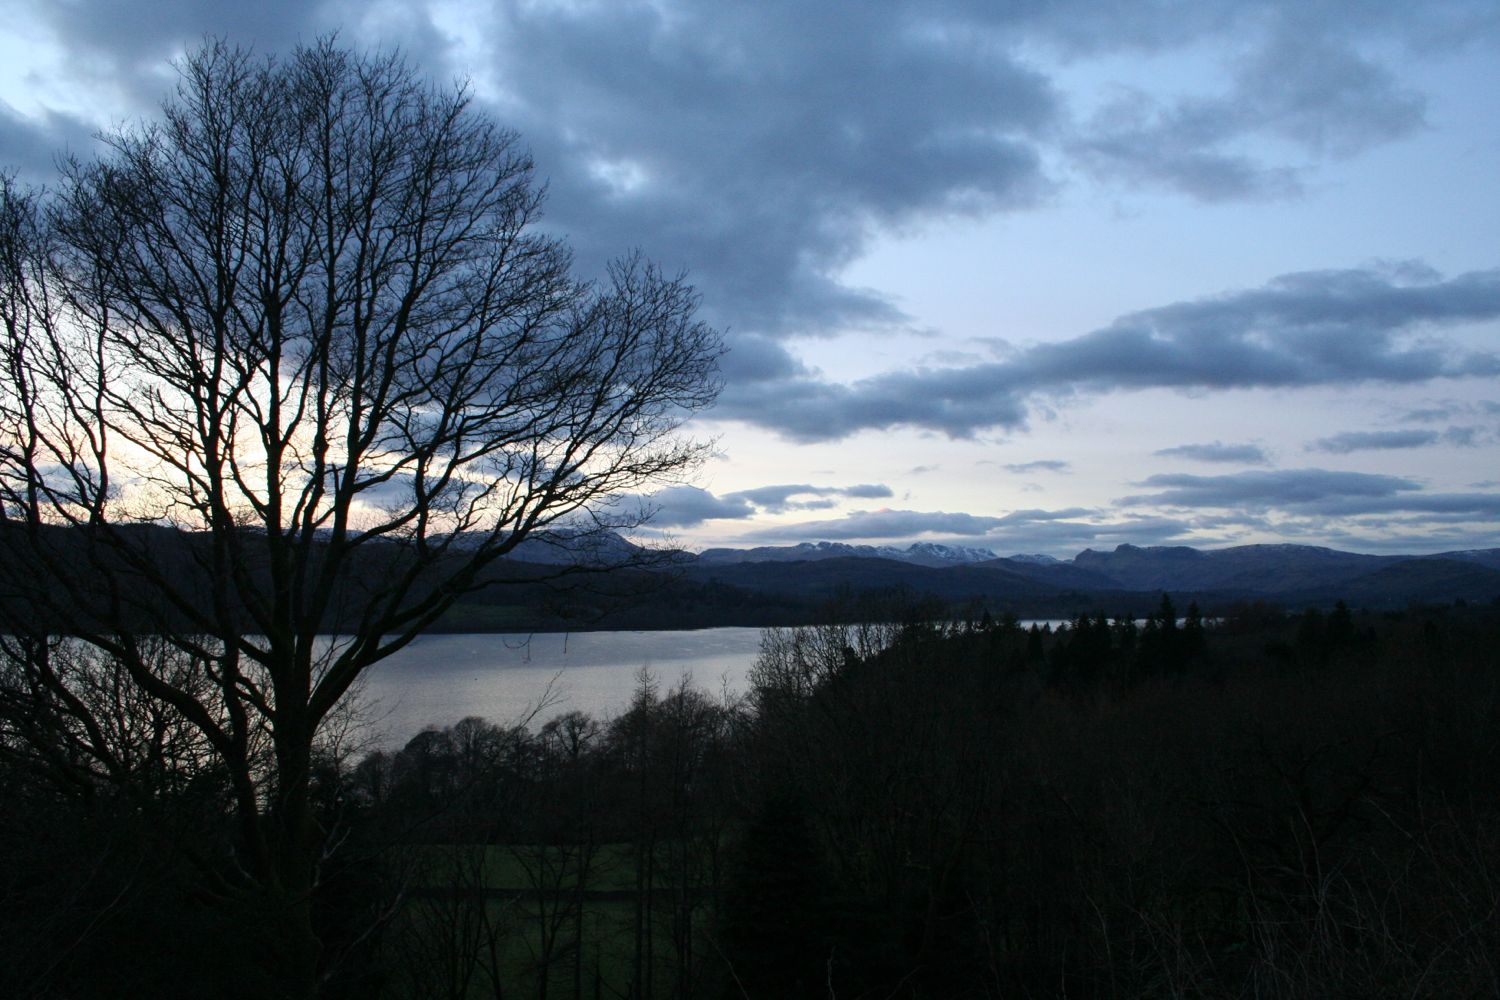 Looking over Windermere at Sunset